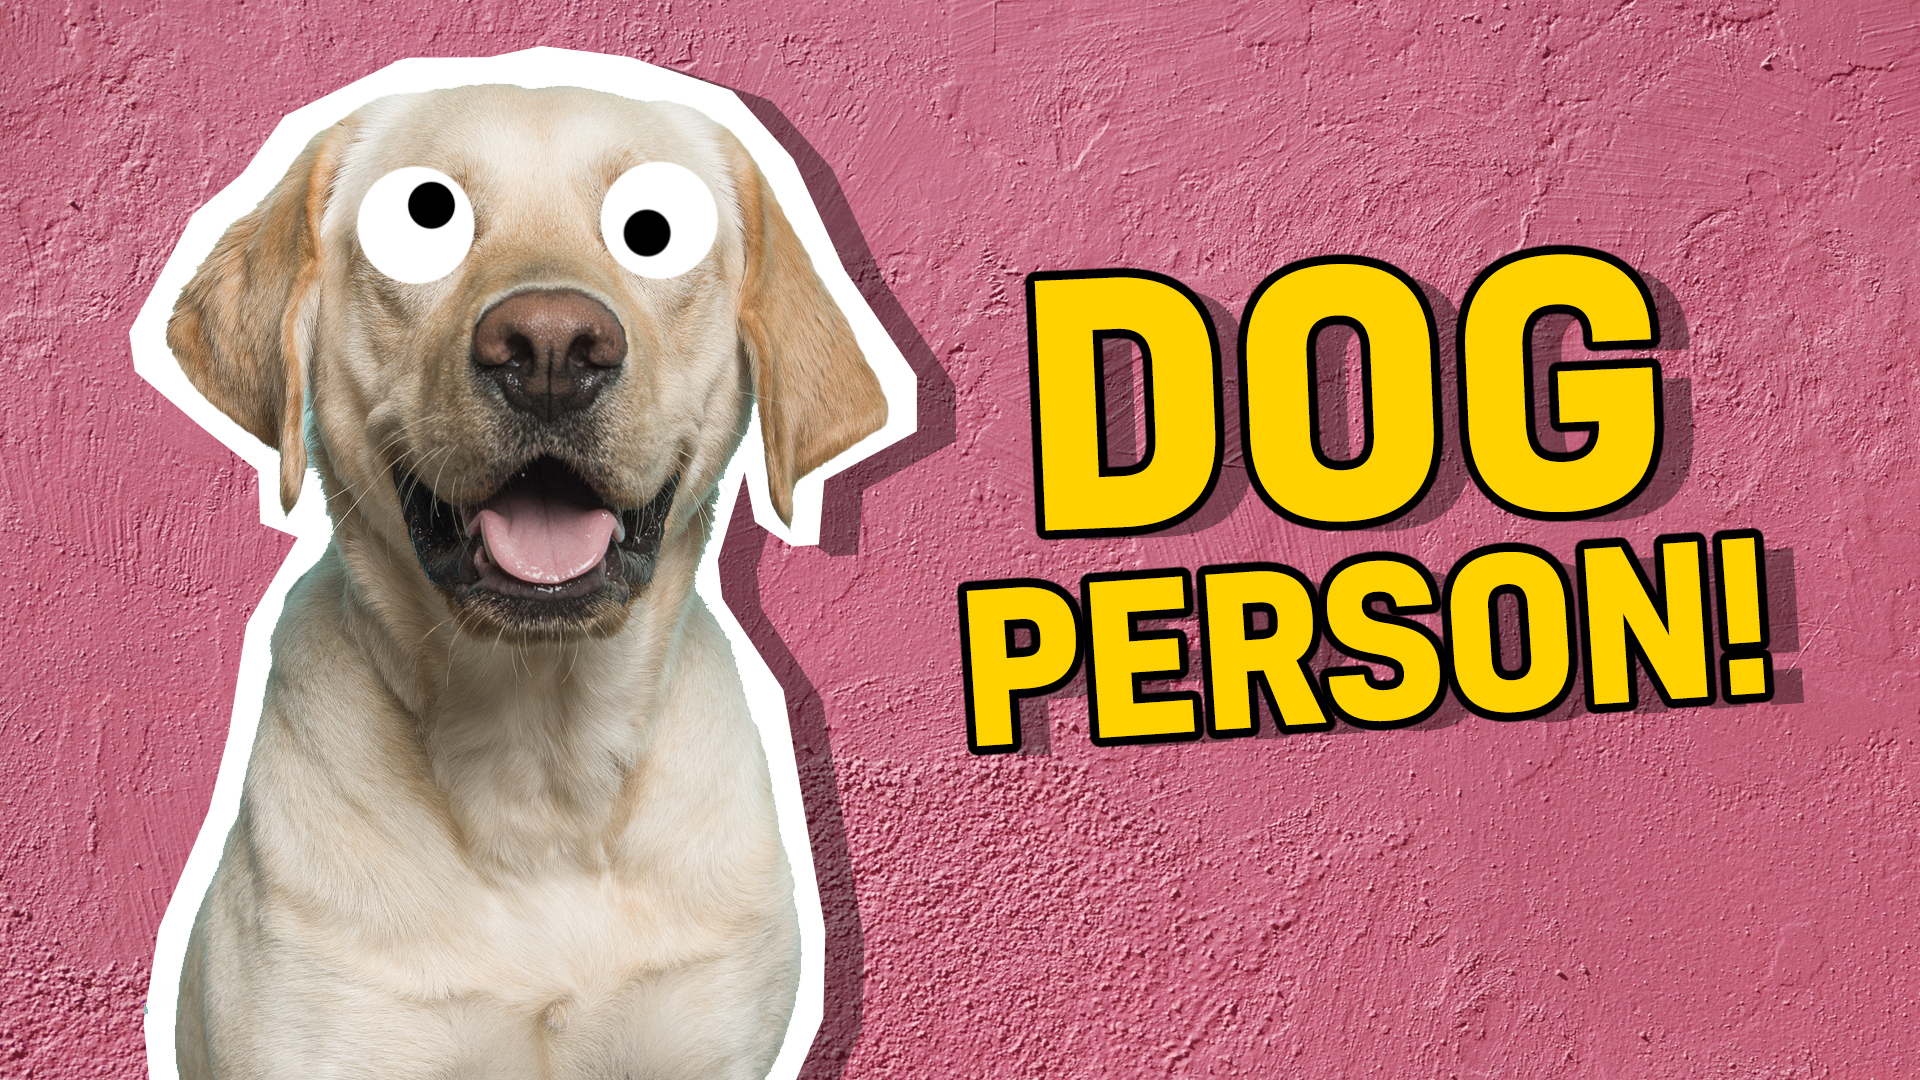 You're a: DOG PERSON!